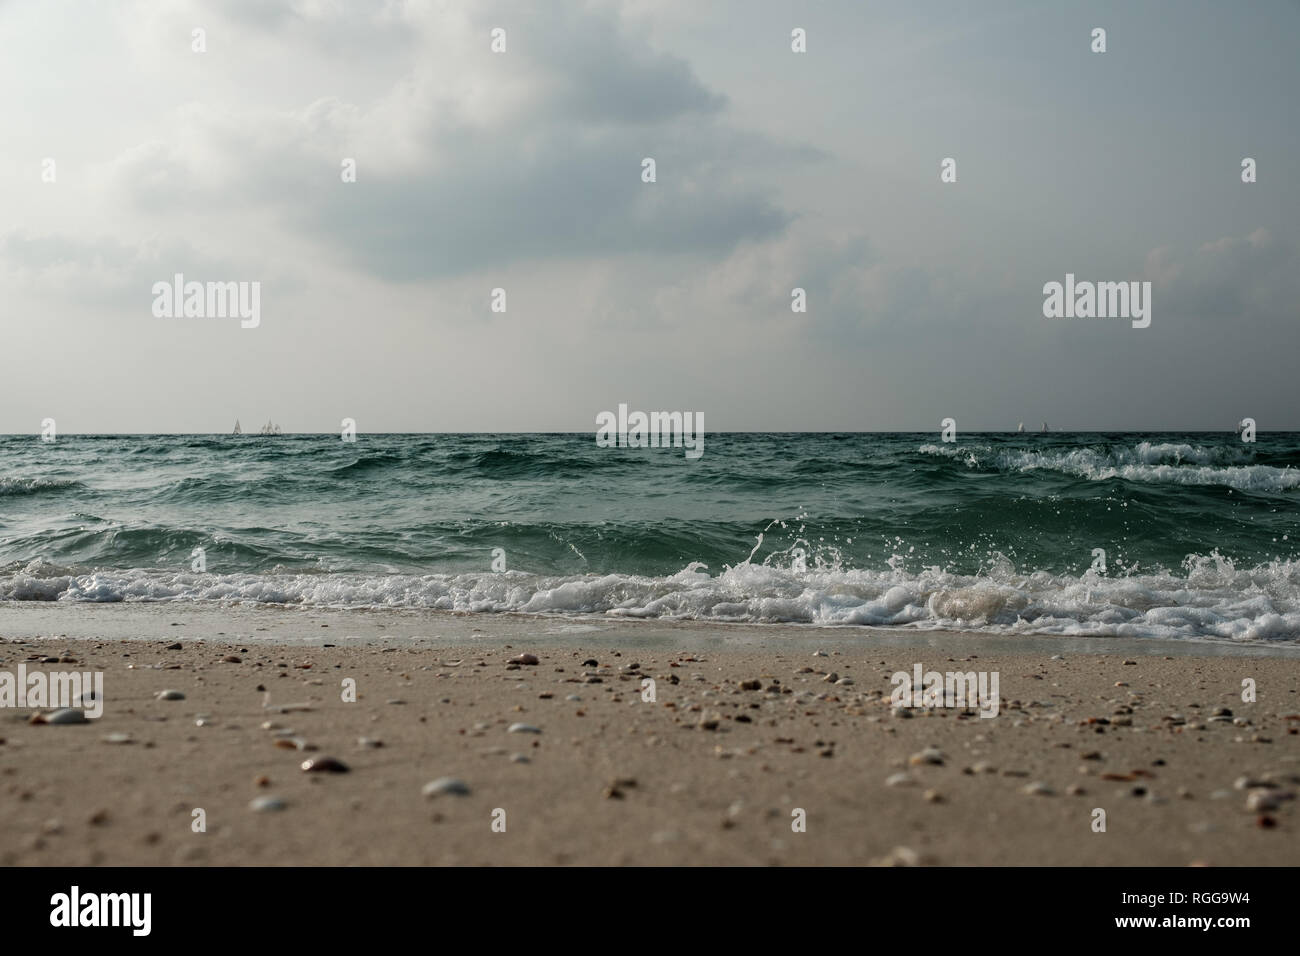 Sailing boats in a distance and waves on the beach, Sharjah, UAE Stock Photo